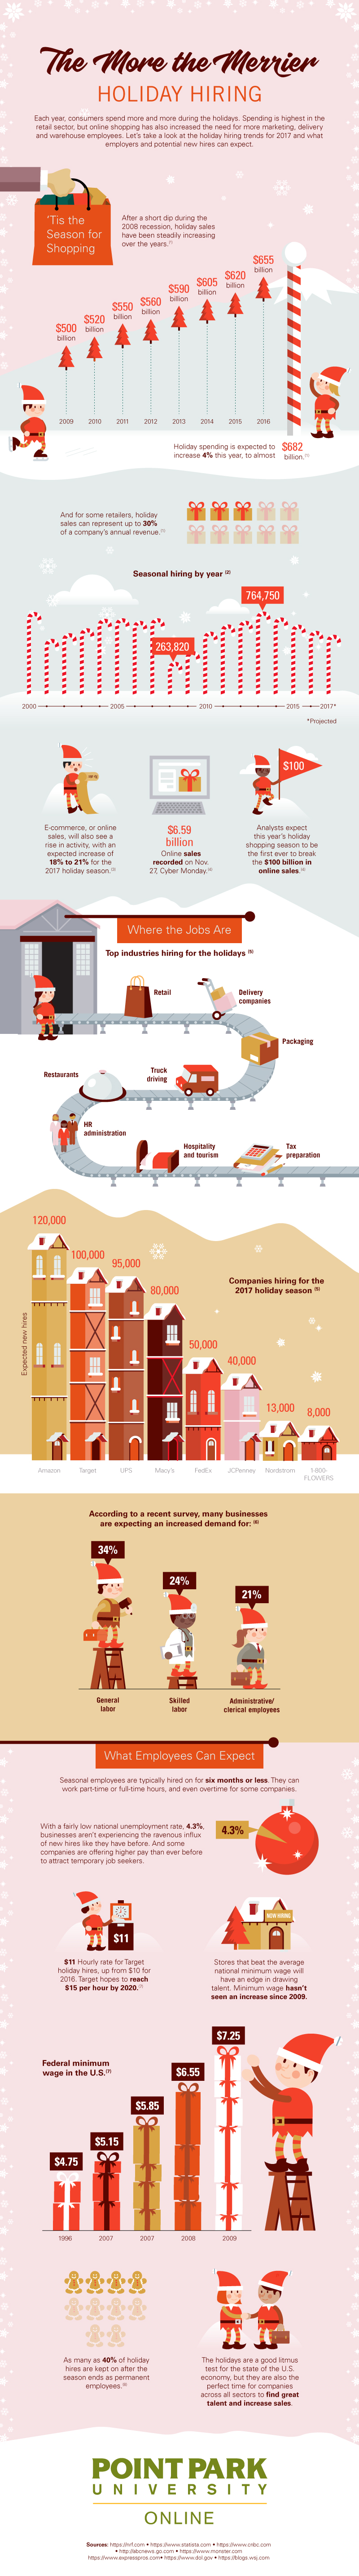 The More The Merrier: Holiday Hiring infographic